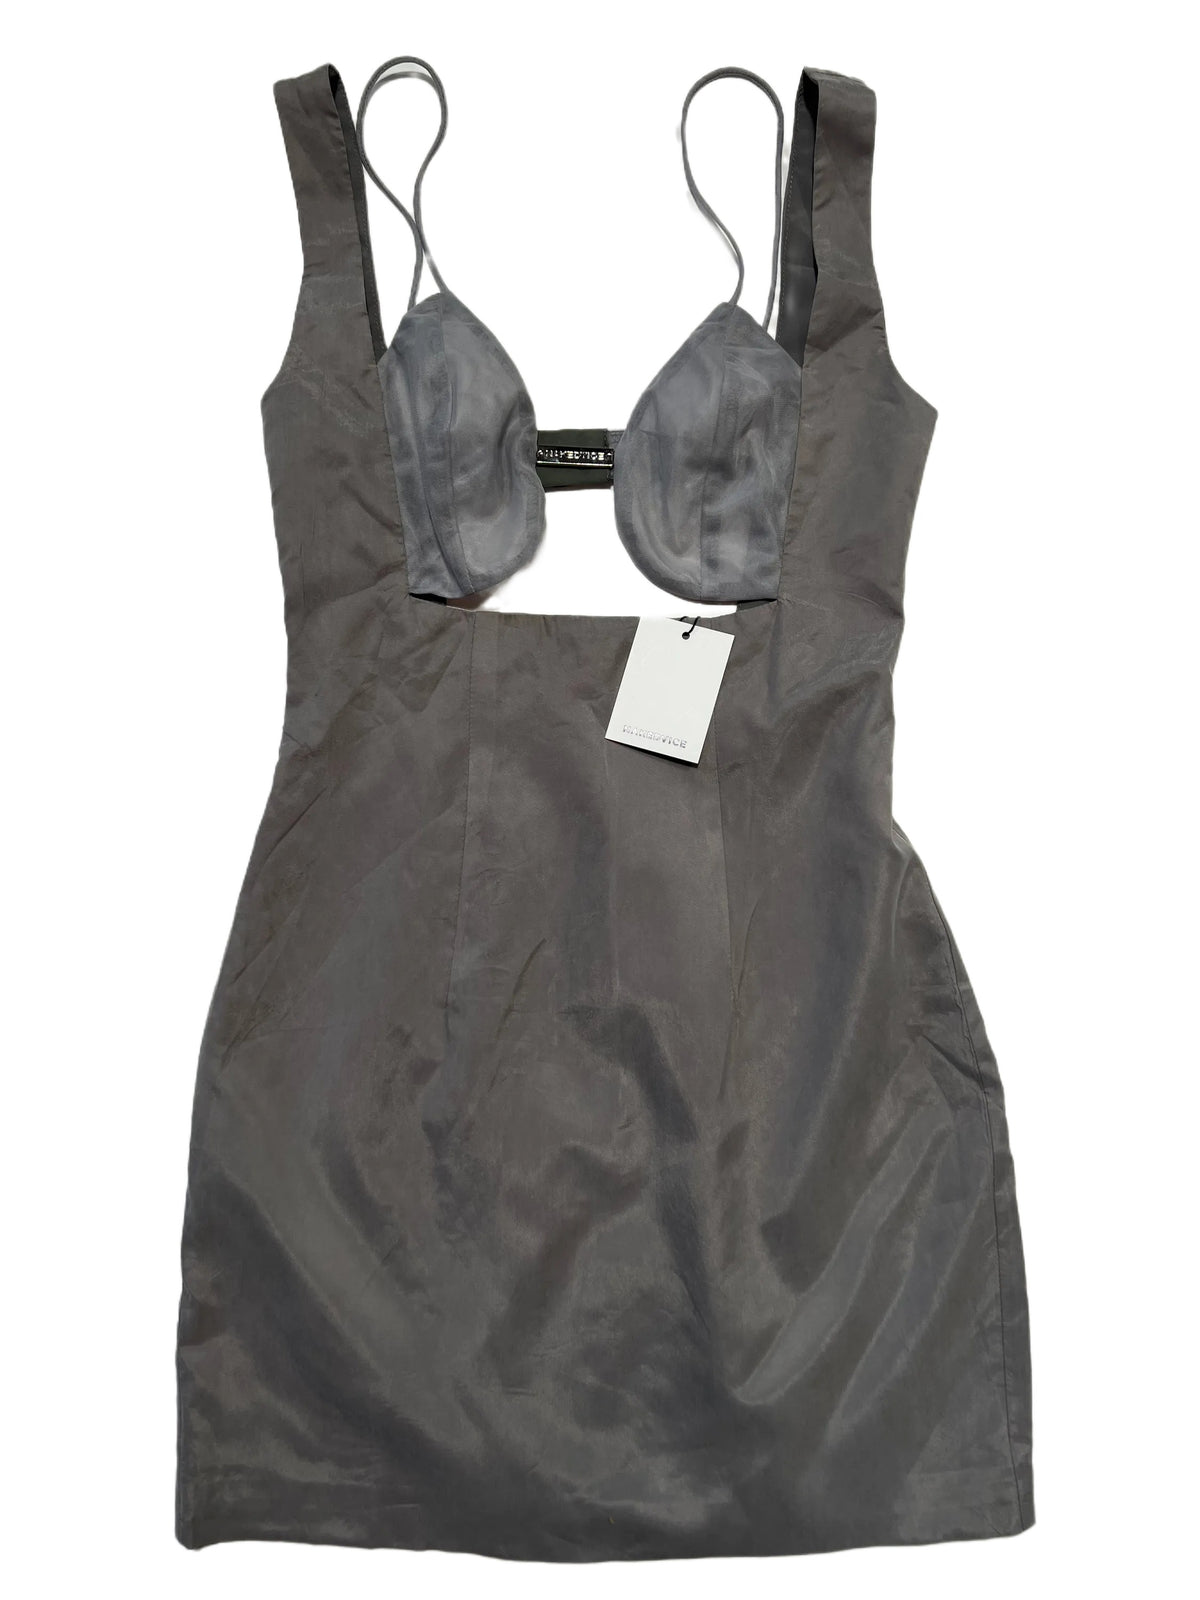 Naked Vice- Grey "The Rex" Mini Dress New With Tags!